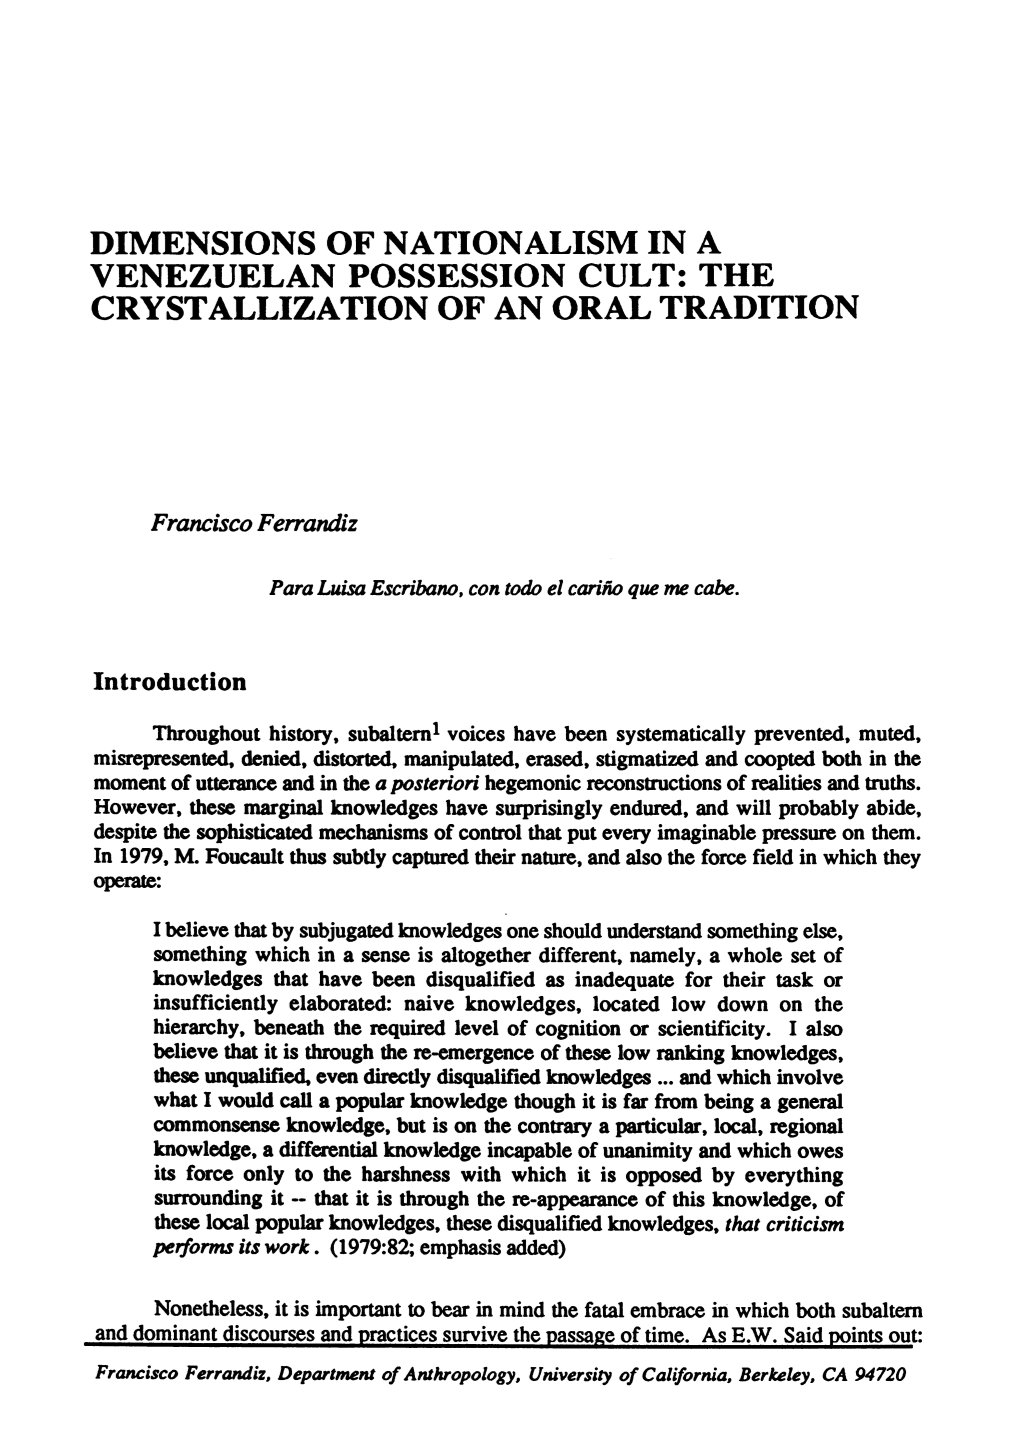 Dimensions of Nationalism in a Venezuelan Possession Cult: the Crystallization of an Oral Tradition